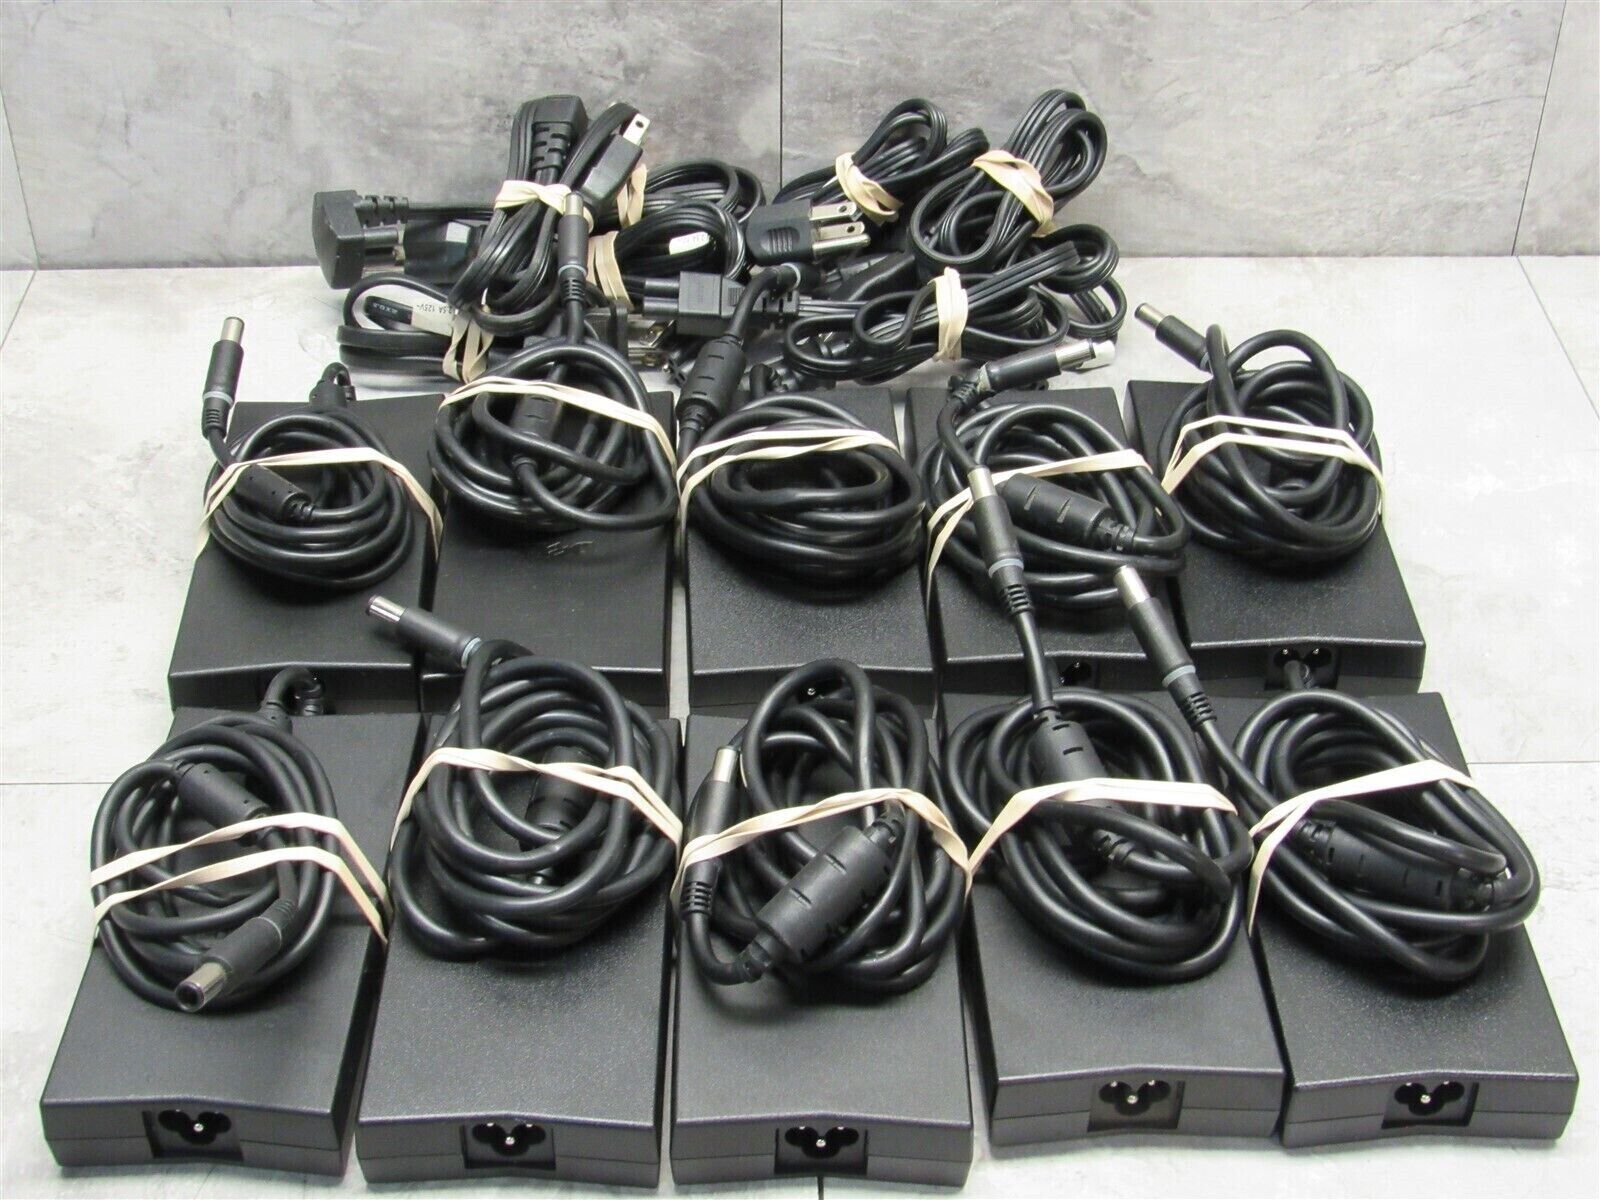 10 LOT - Genuine Dell 130W 6.7A Laptop Adapter PA-4E Power OEM Charger BIG TIP